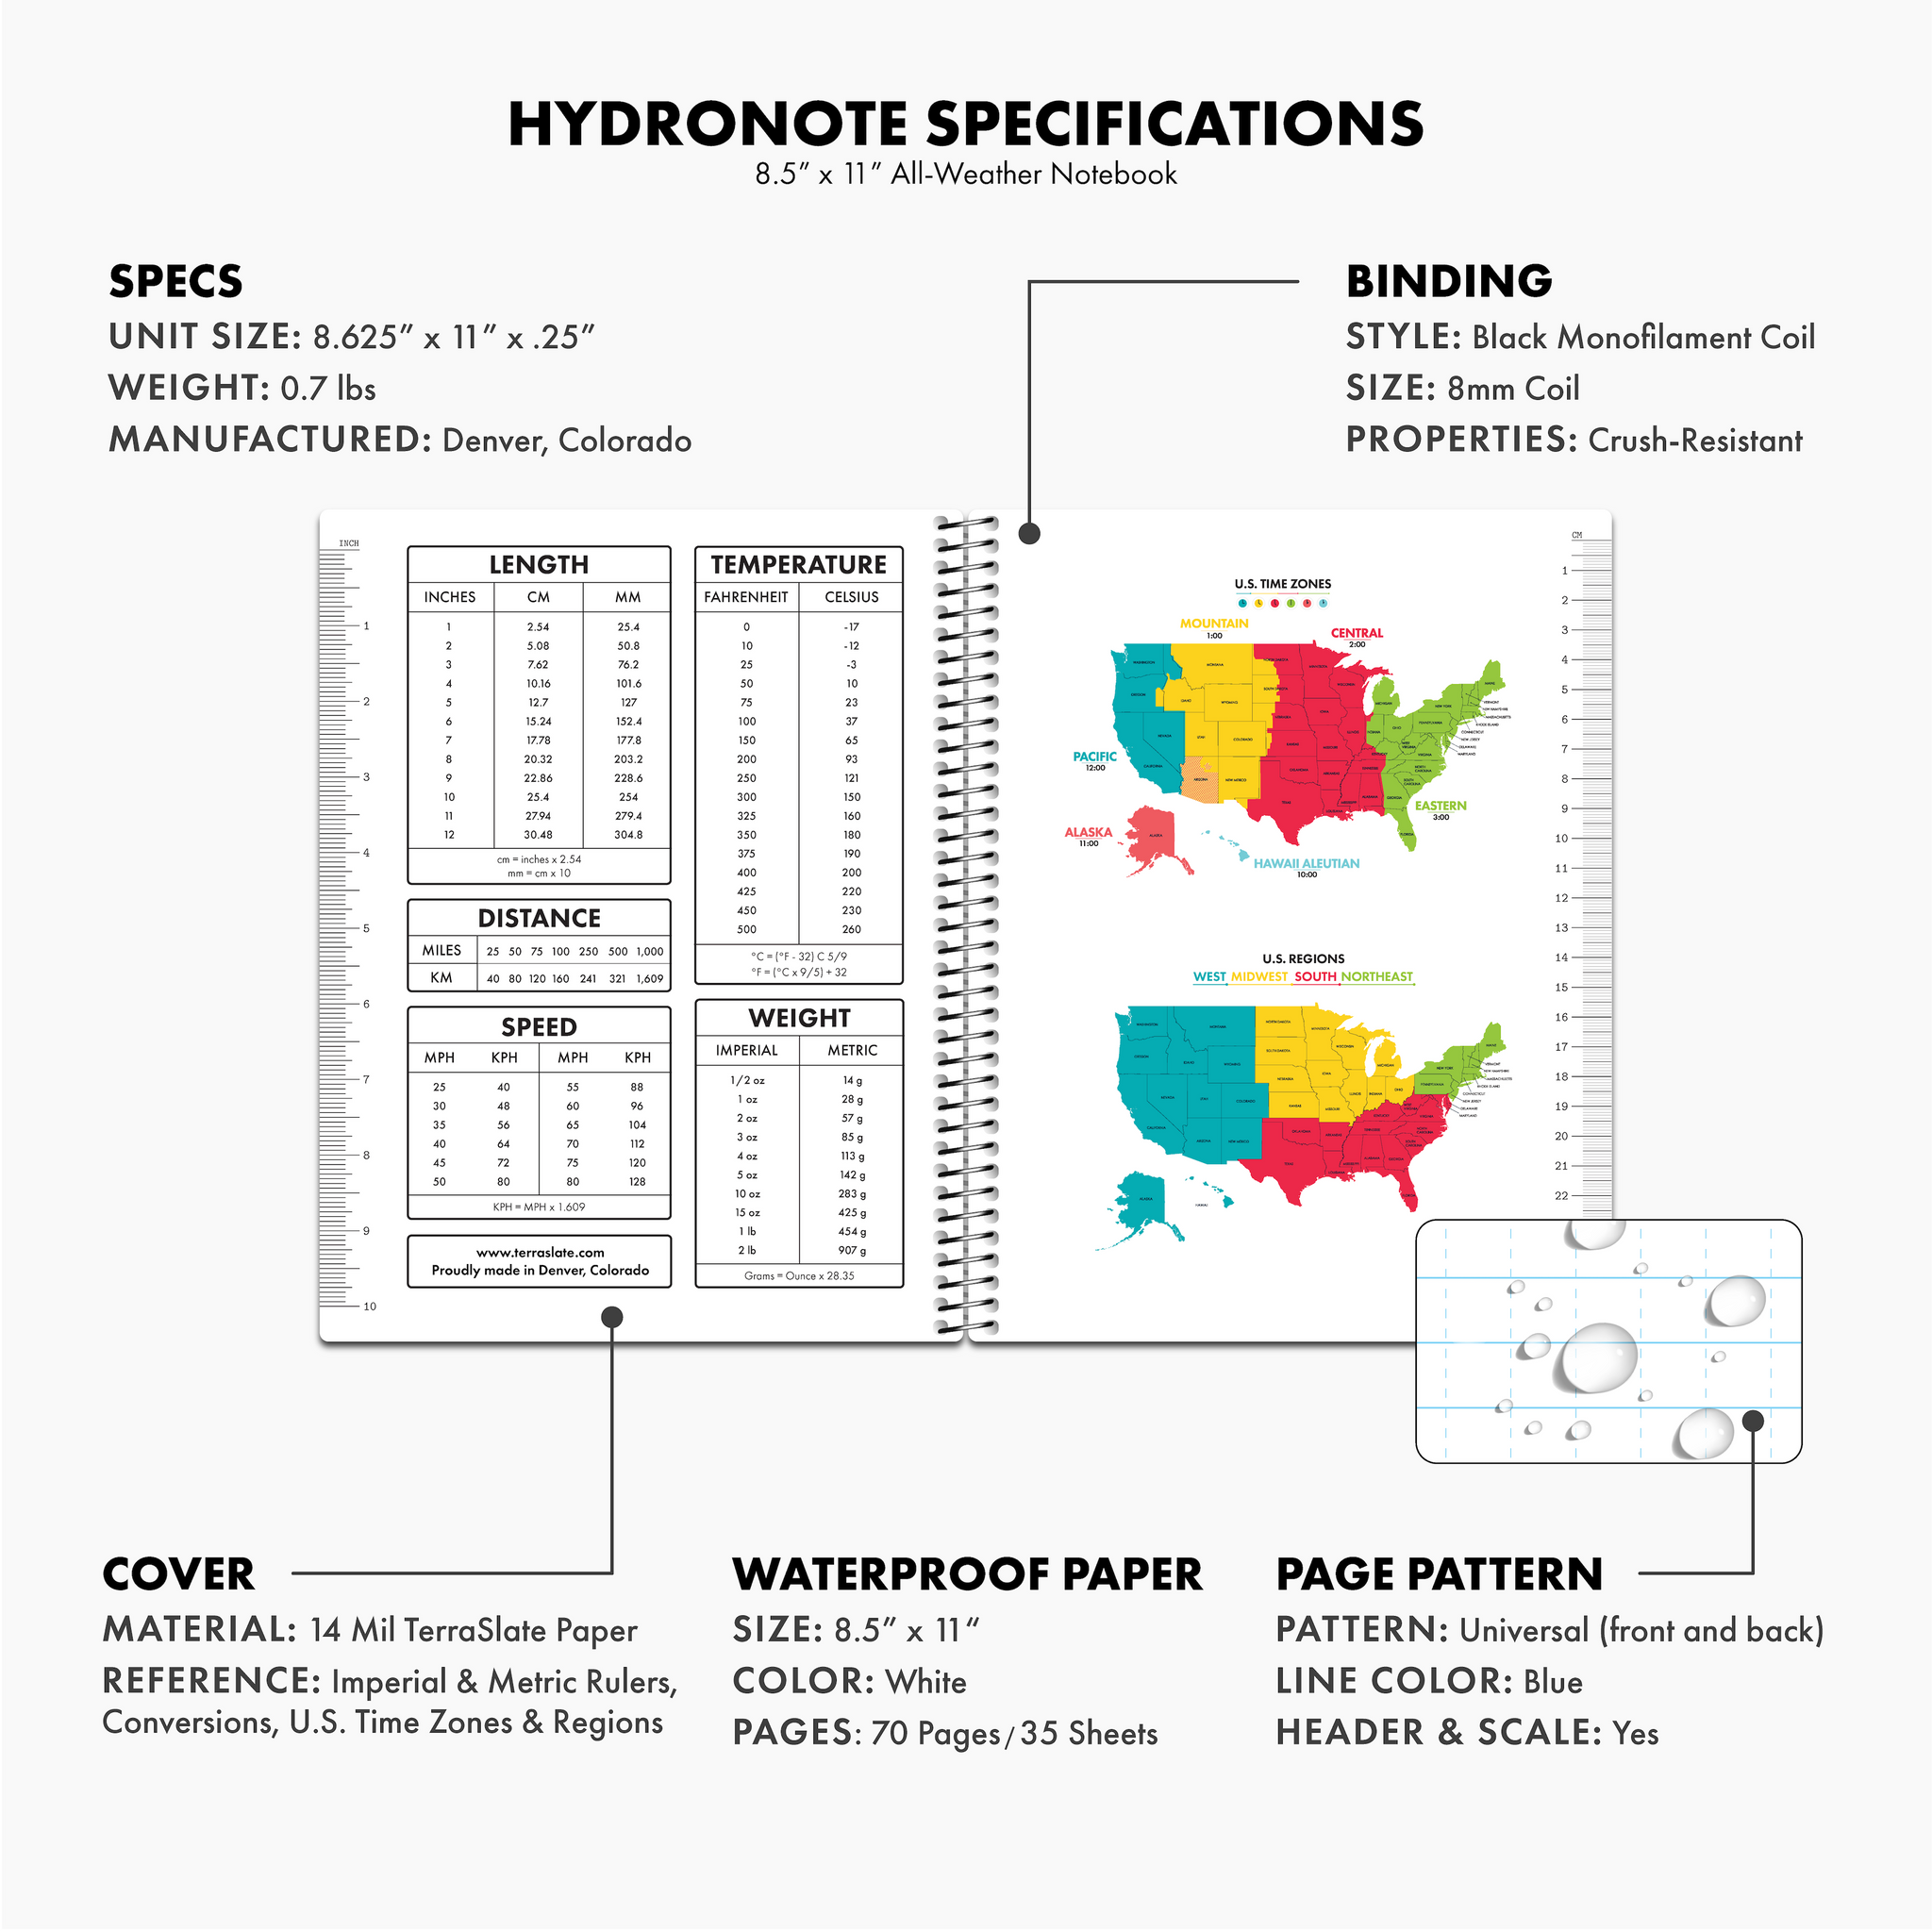 Hydronote All-Weather Notebook Specs